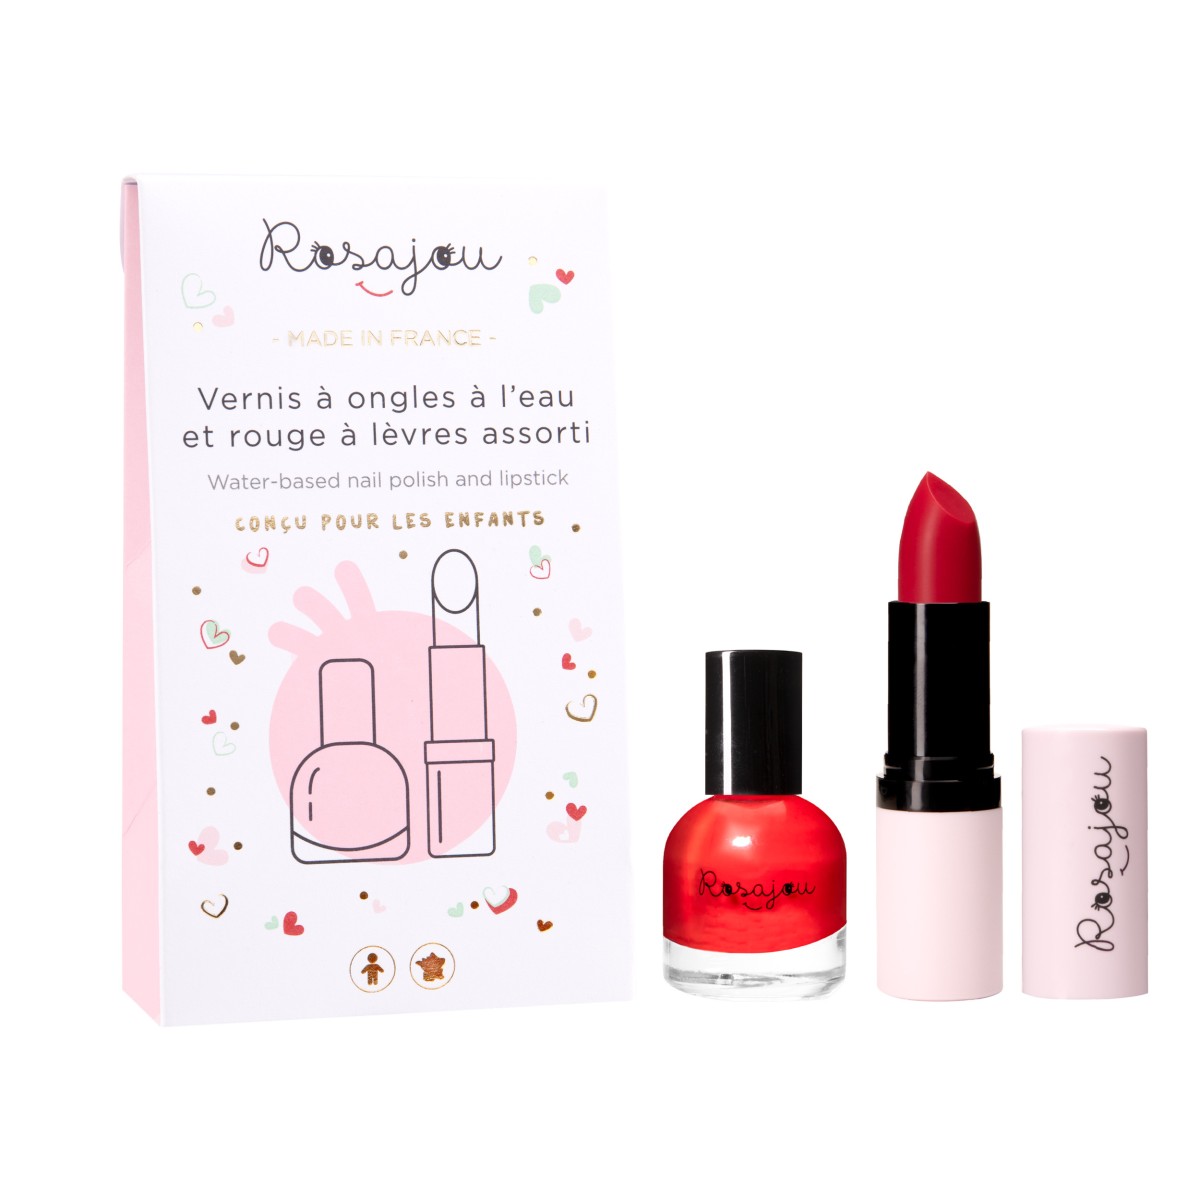 Red Lipstick and nail polish for children